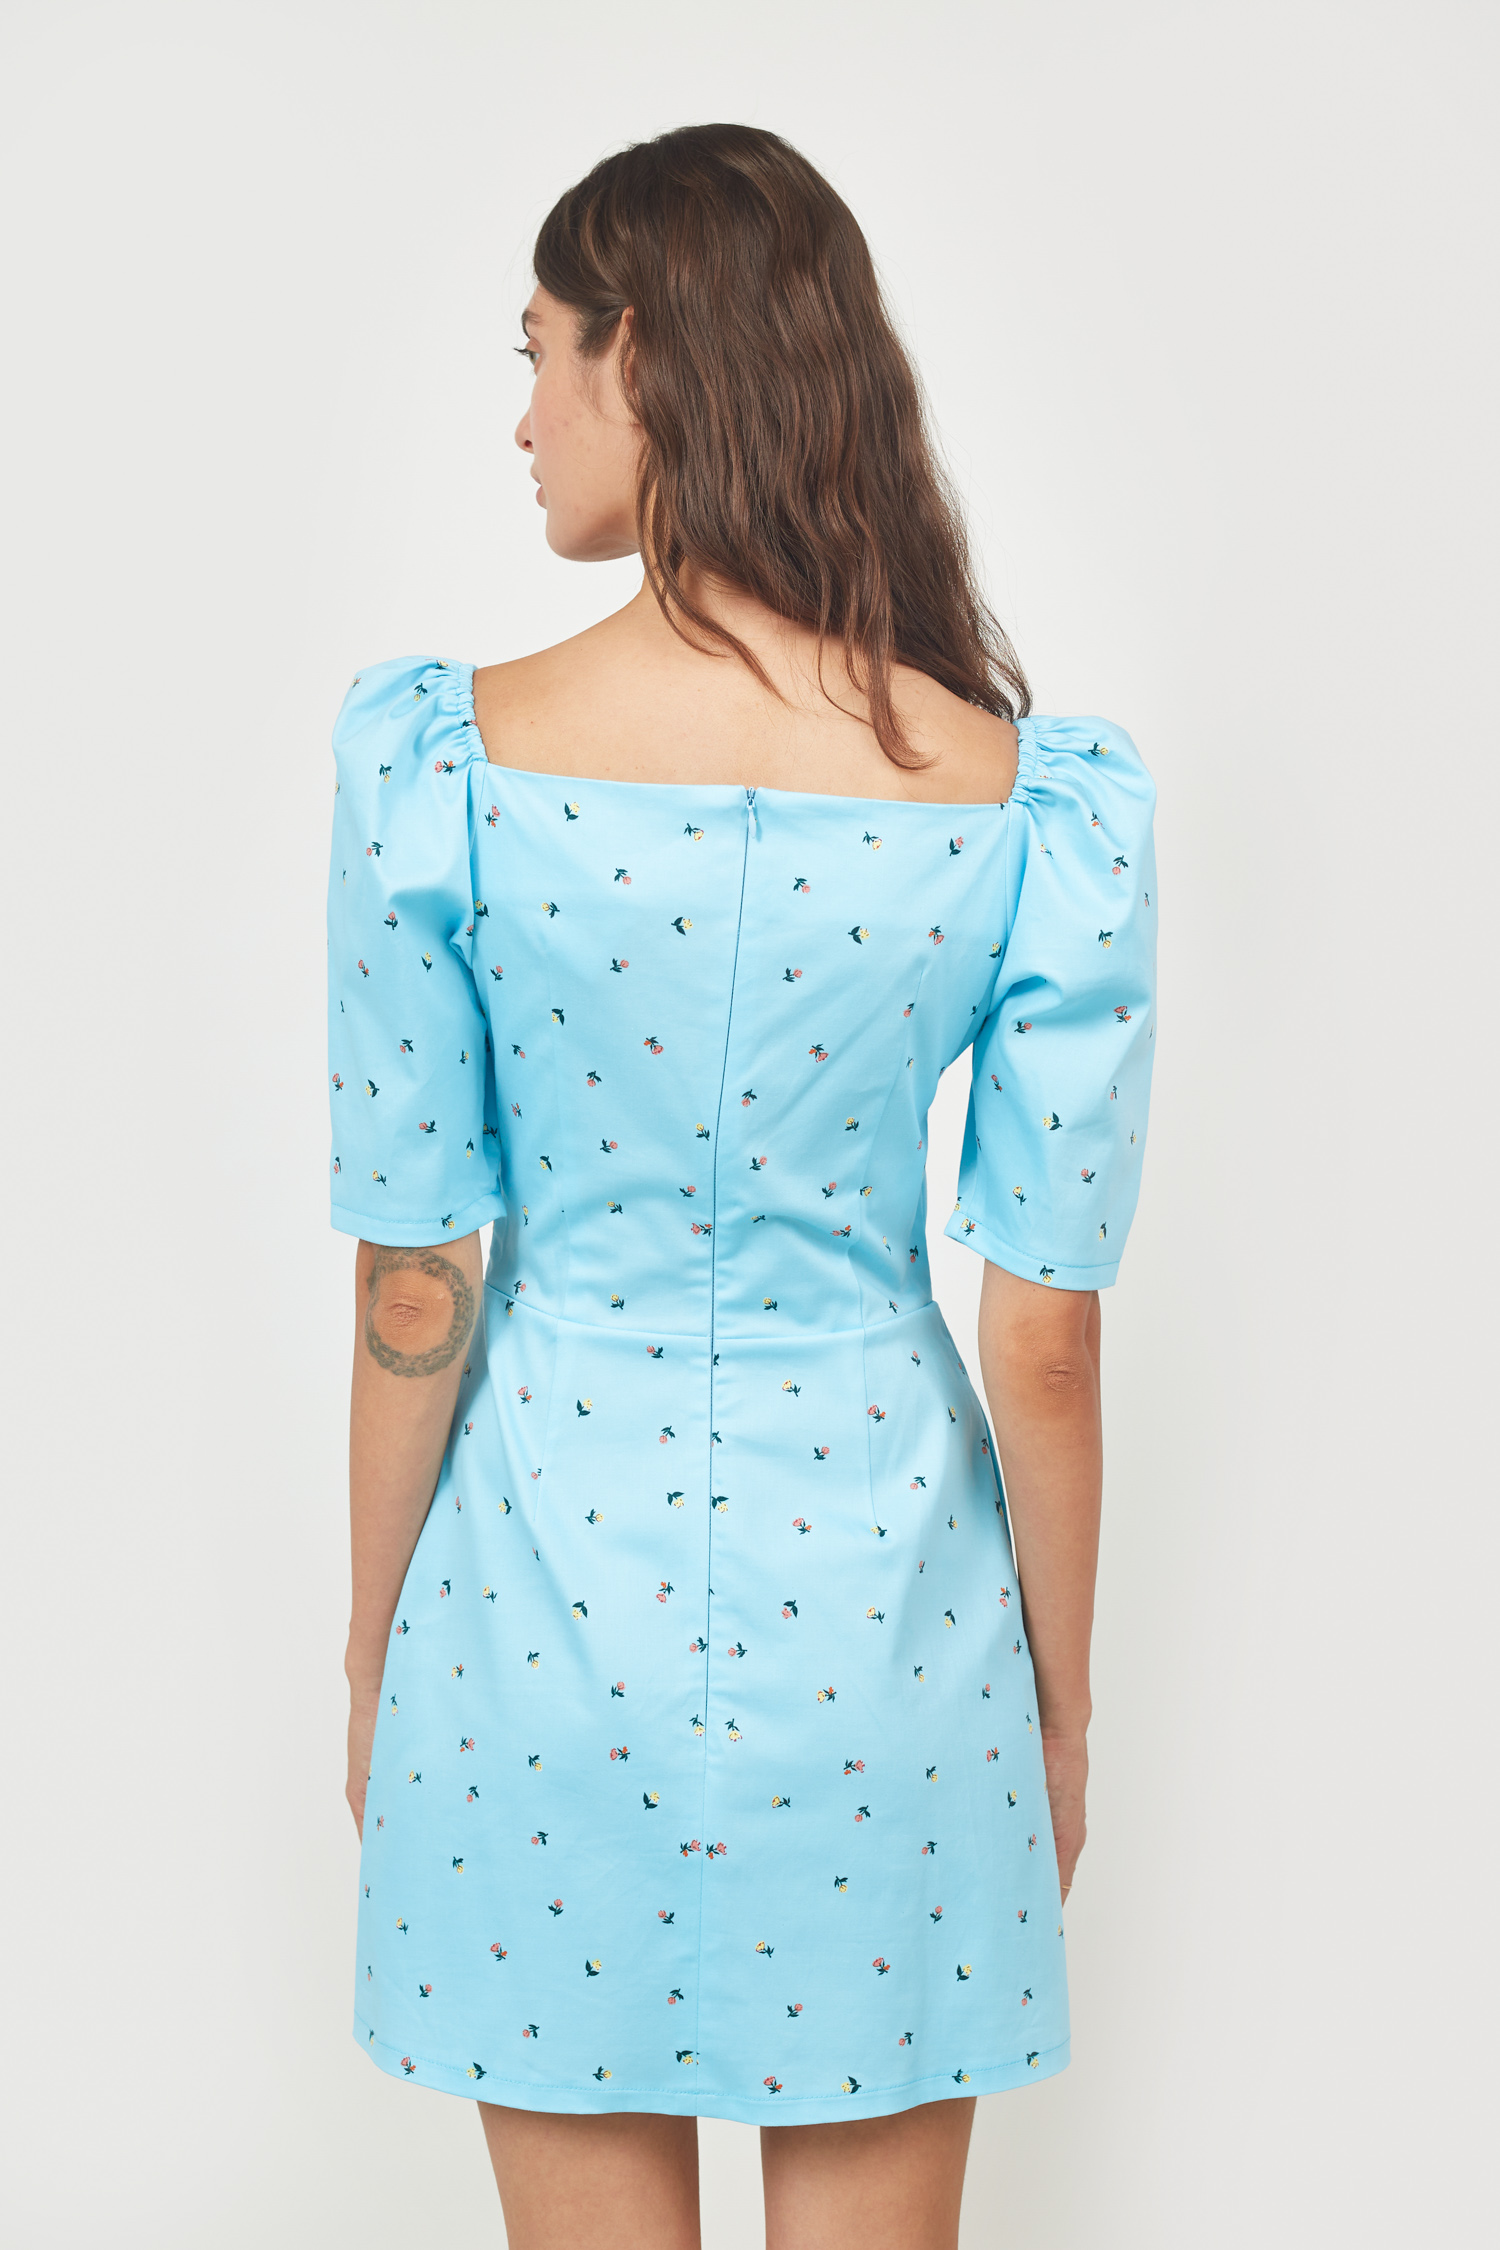 Short blue dress with floral print, photo 4